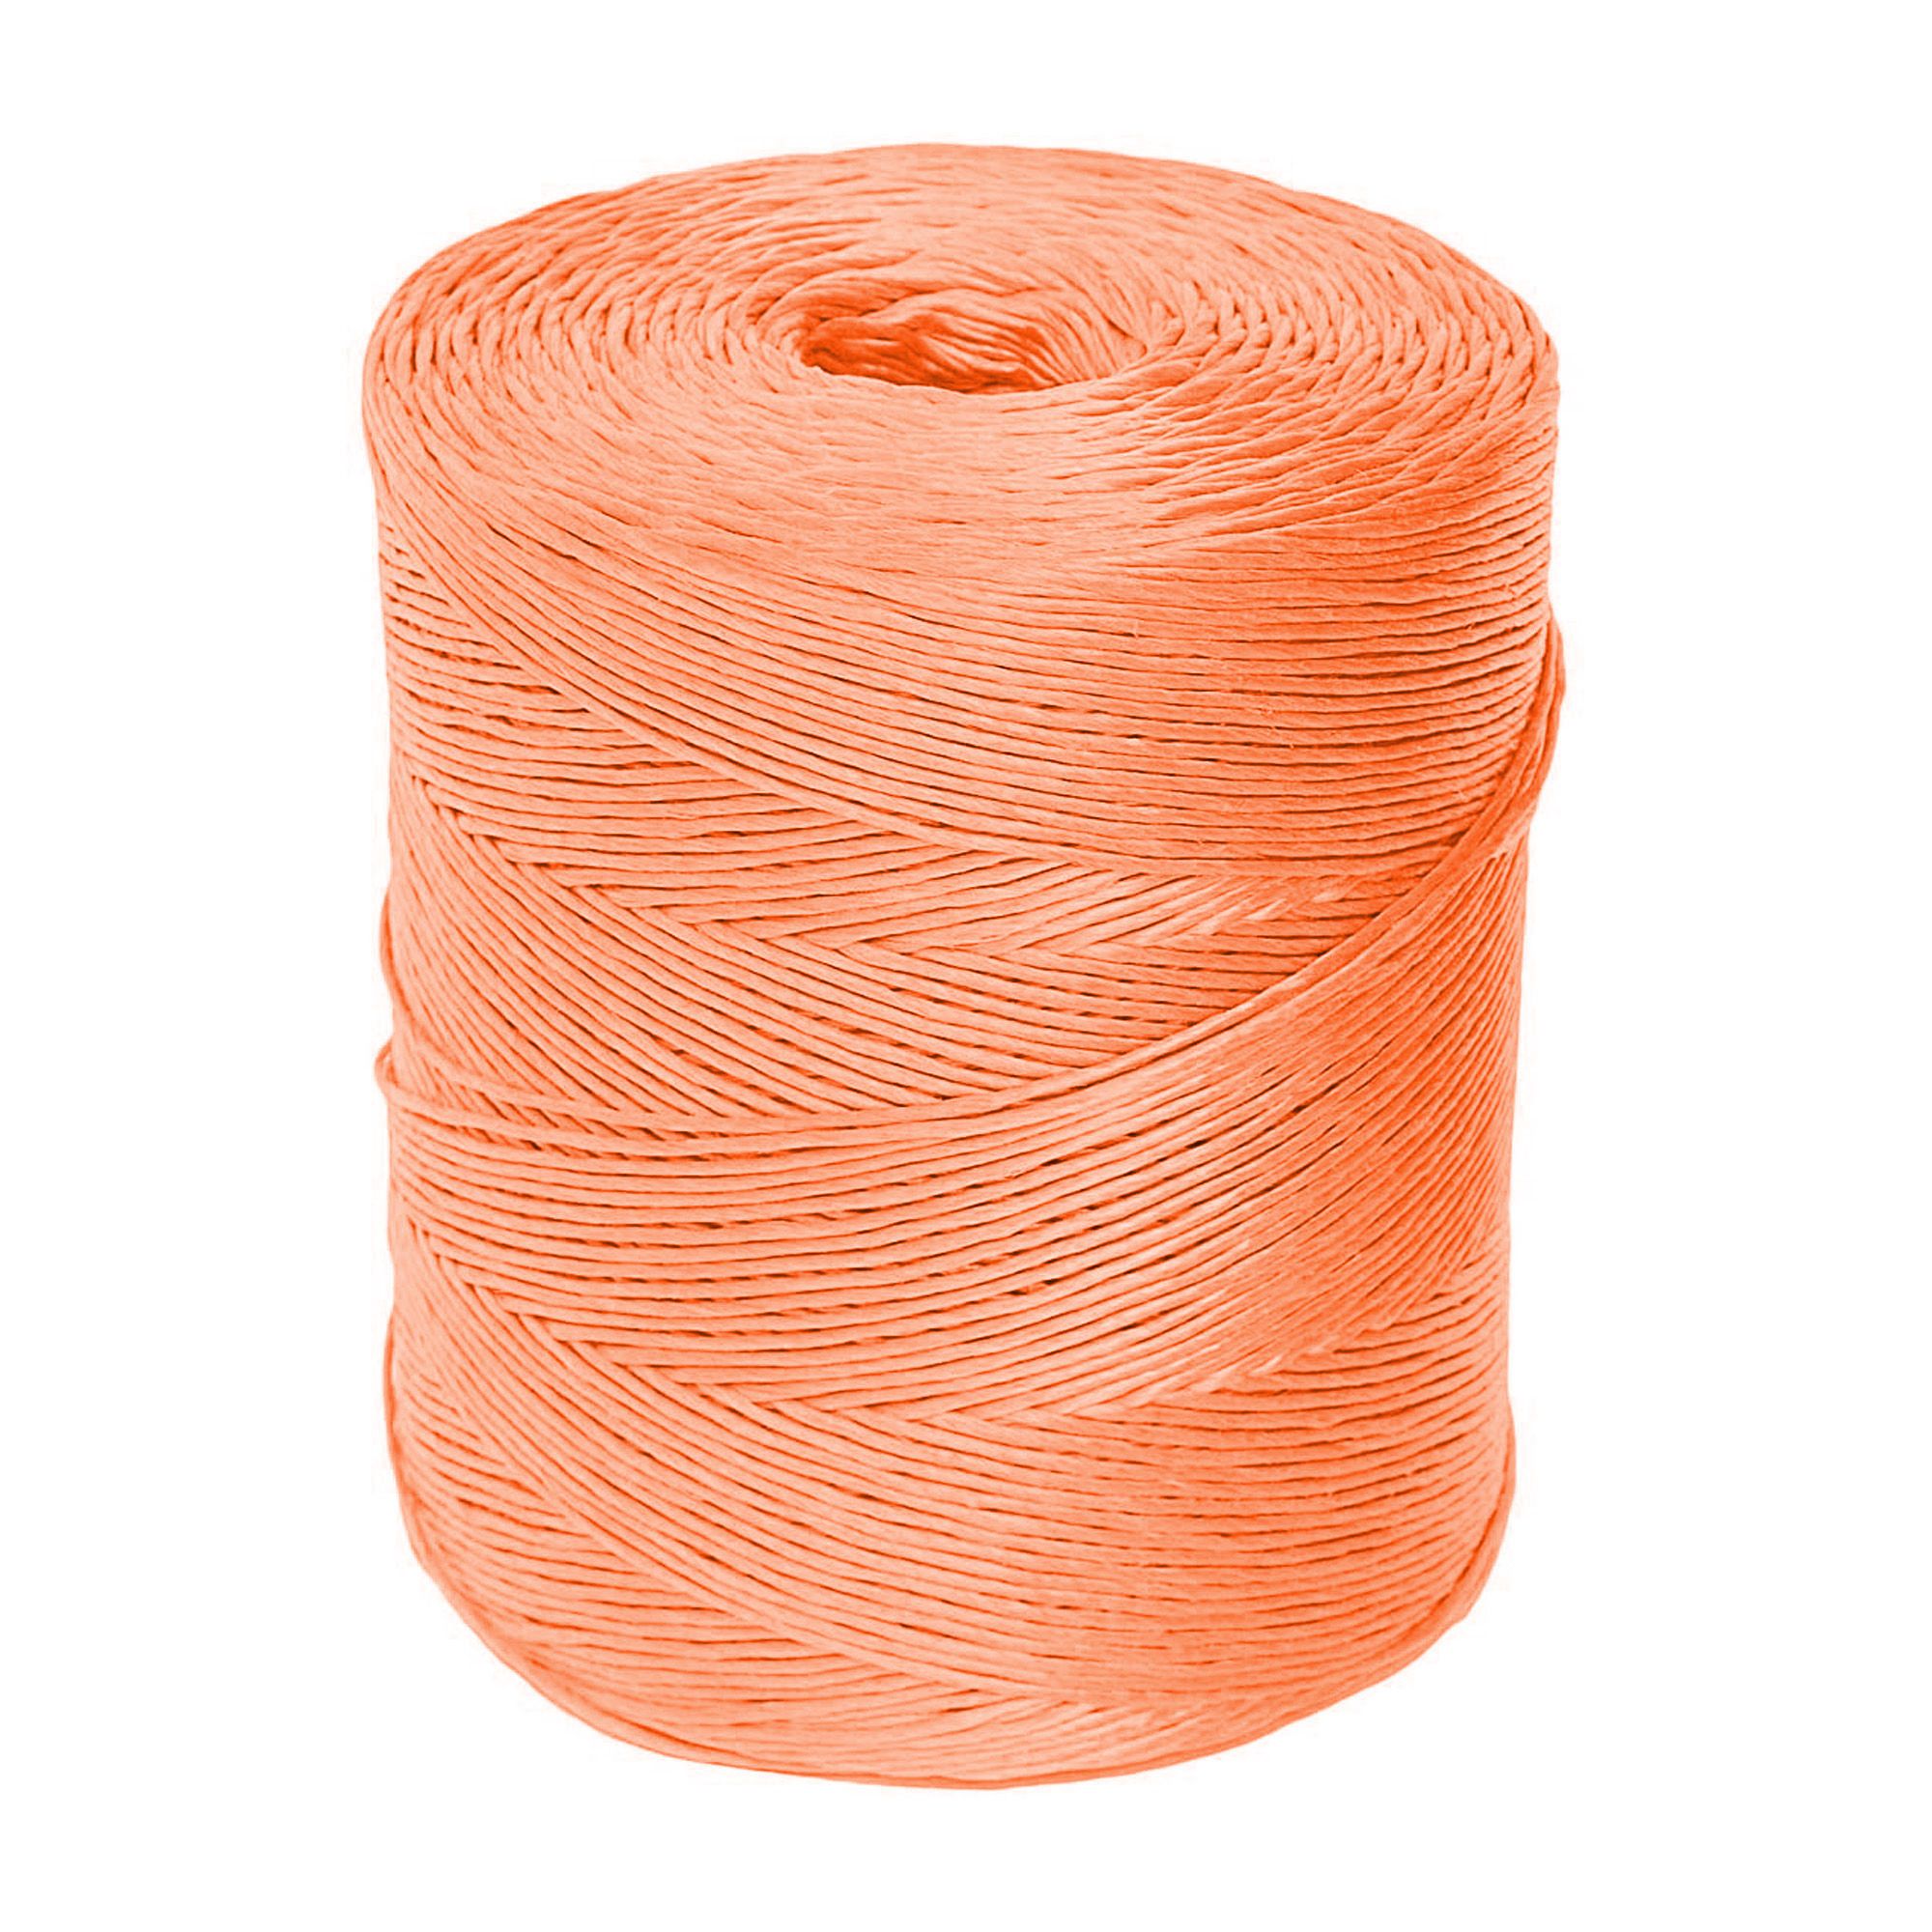 Synthetic twine for small square bale - 9 000'-20 lb - Orange - 2